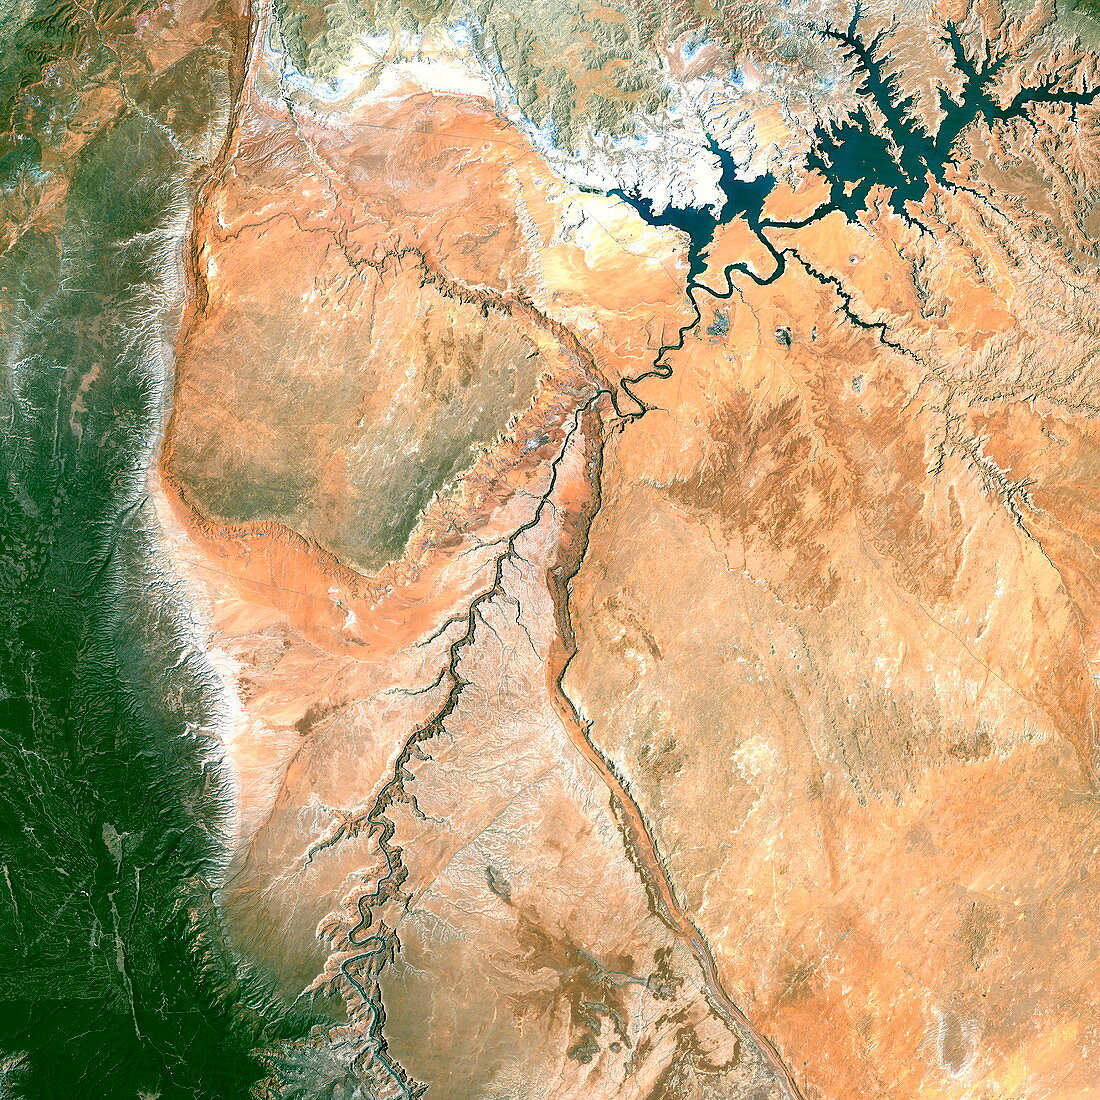 Lake Powell and the Colorado river